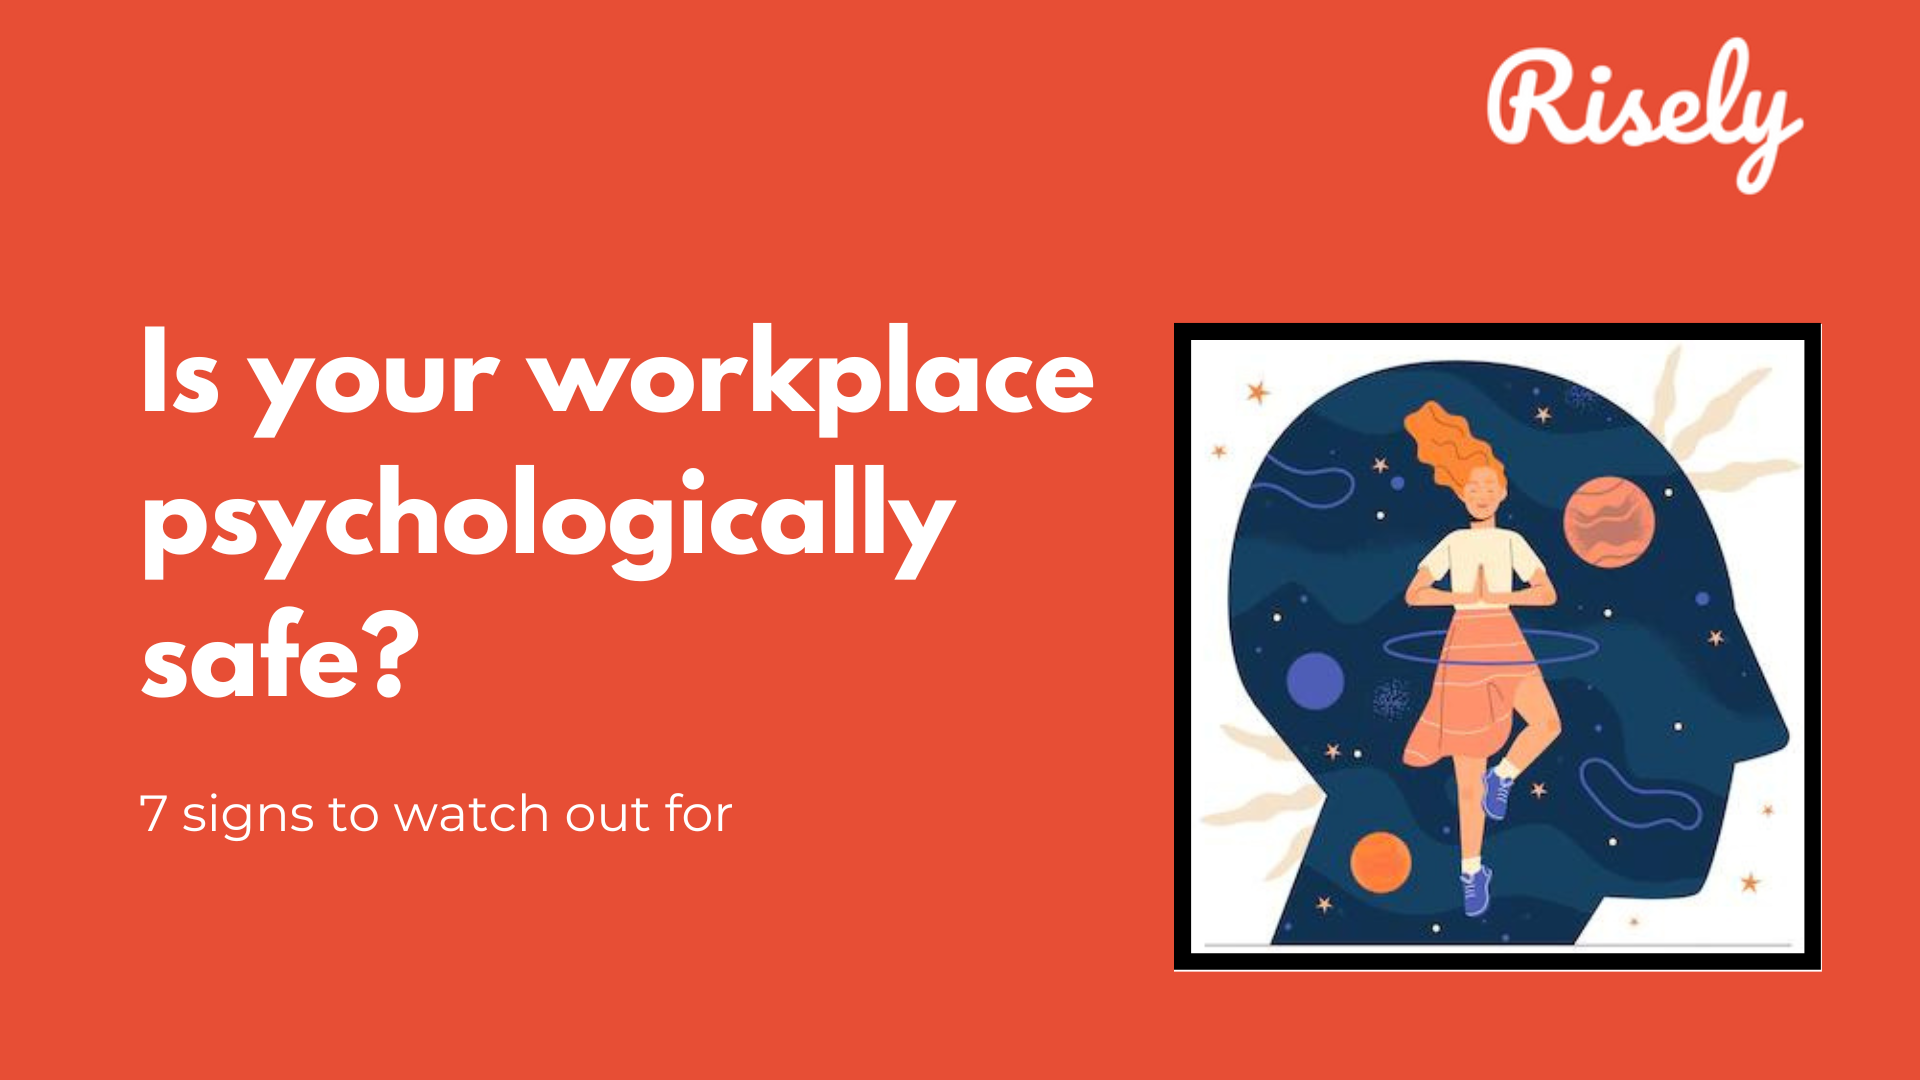 Is your workplace psychologically safe? 7 signs to watch out for